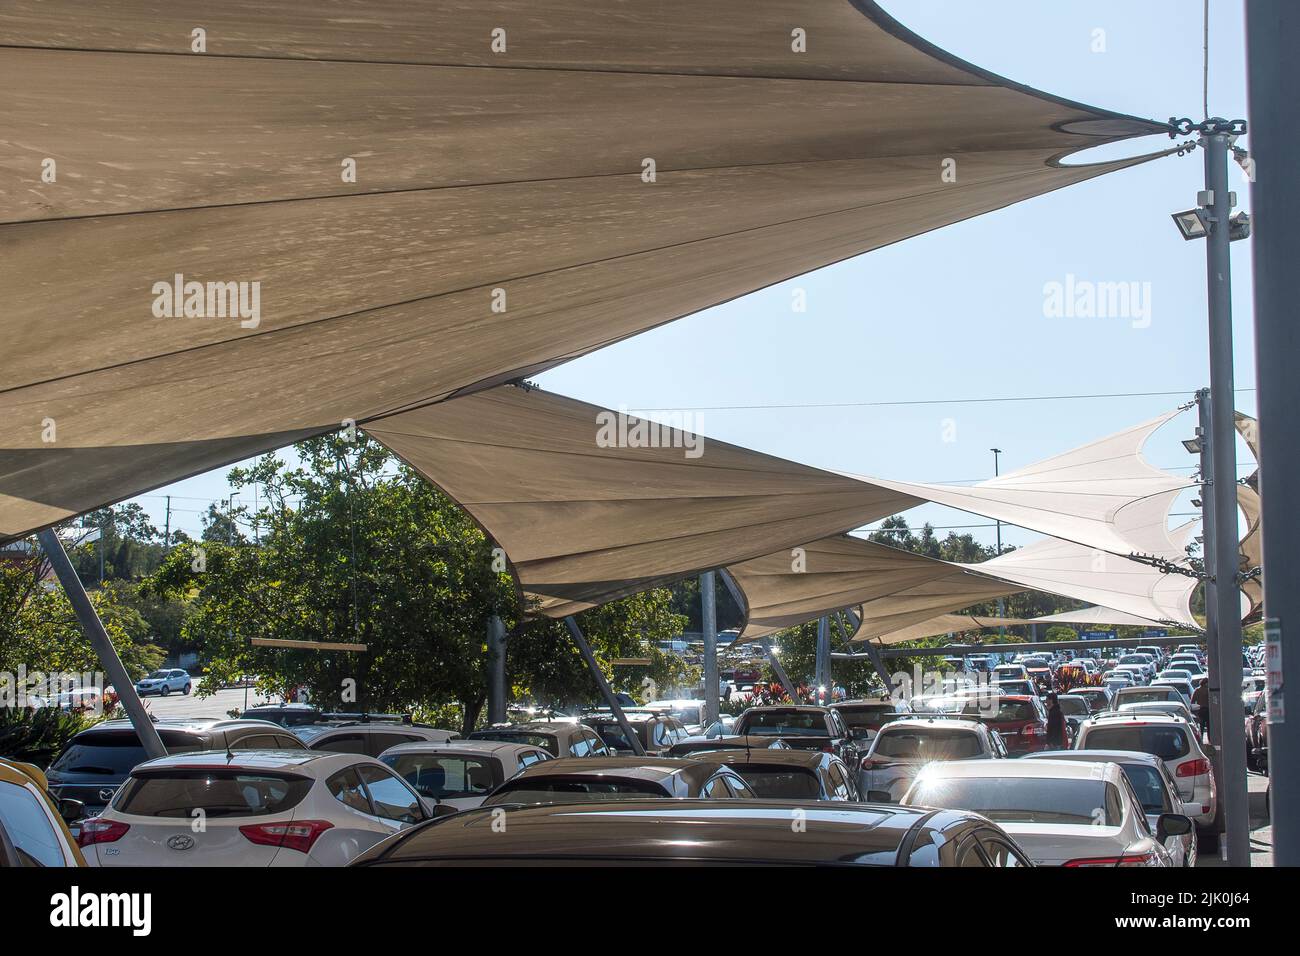 Shade sails over vehicles in car park at shopping centre on the Gold Coast, Queensland, Australia. Cars protected from strong sunlight and heat. Stock Photo